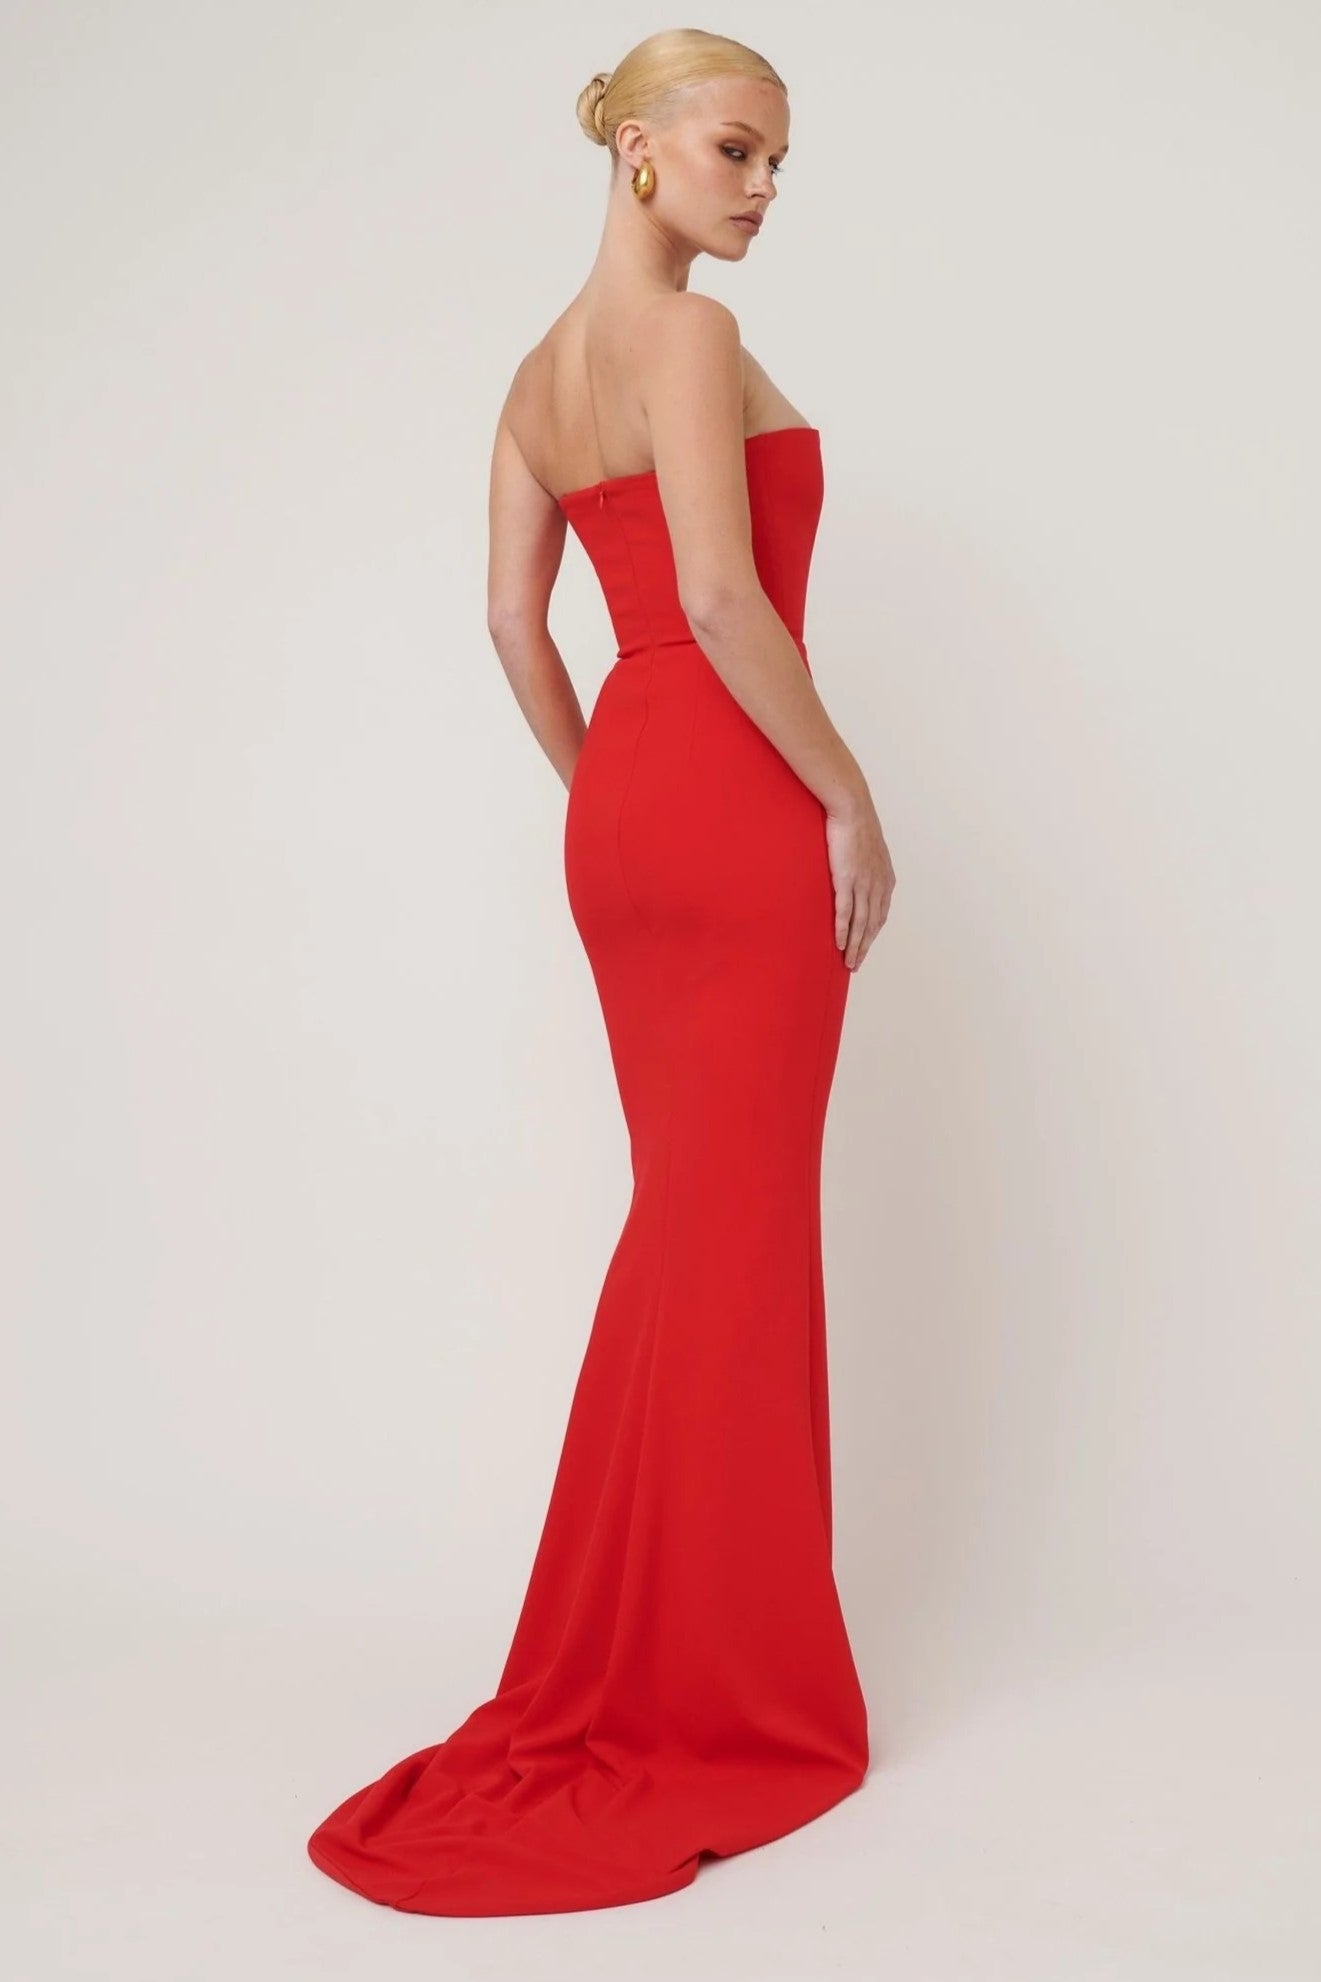 Jackie O Gown - Cherry Red - SHOPJAUS - JAUS